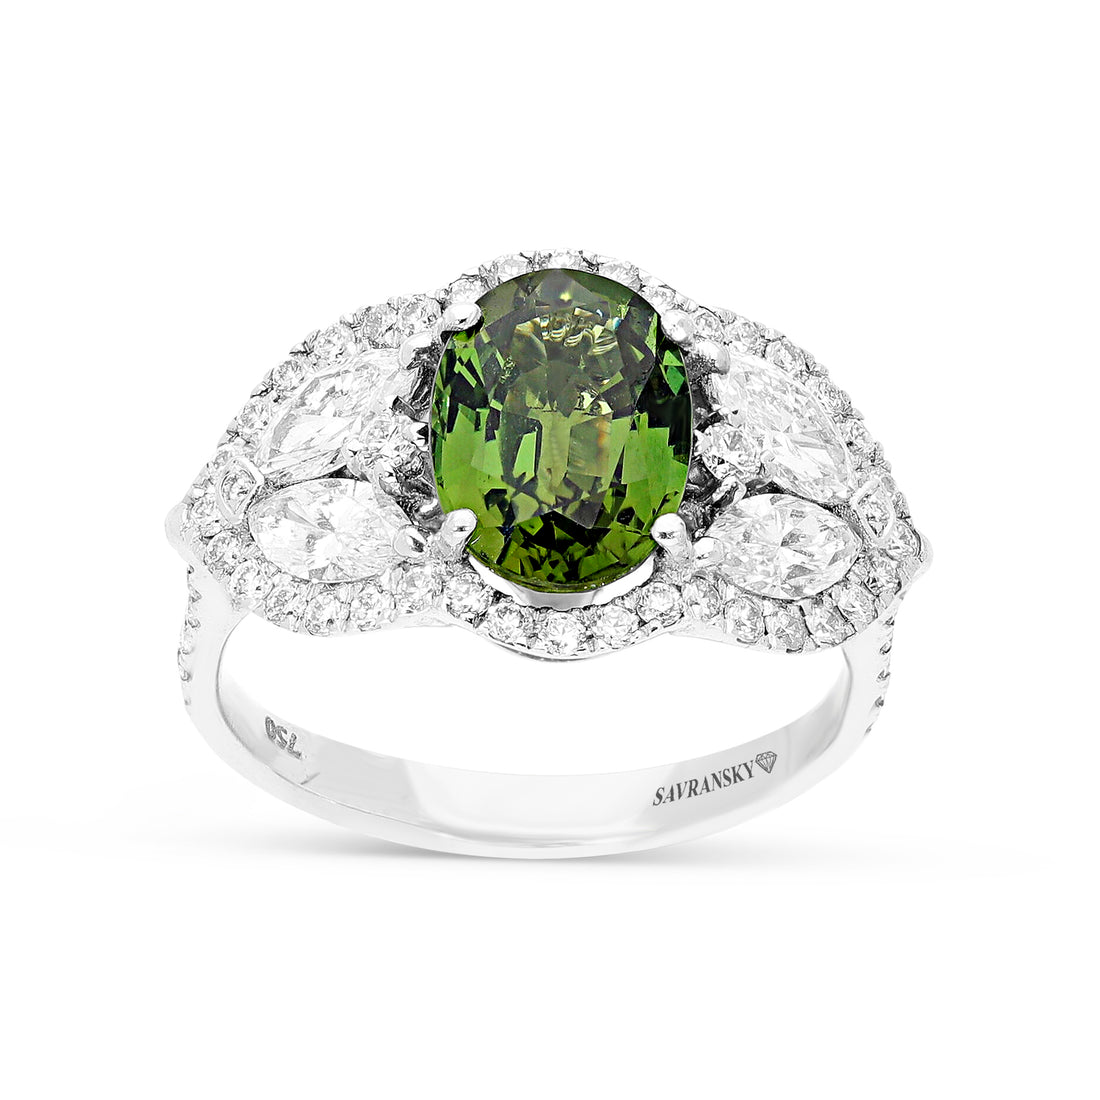 Oval Cut Alexandrite and Marquise Cut Diamond Ring - 3.82 Carat